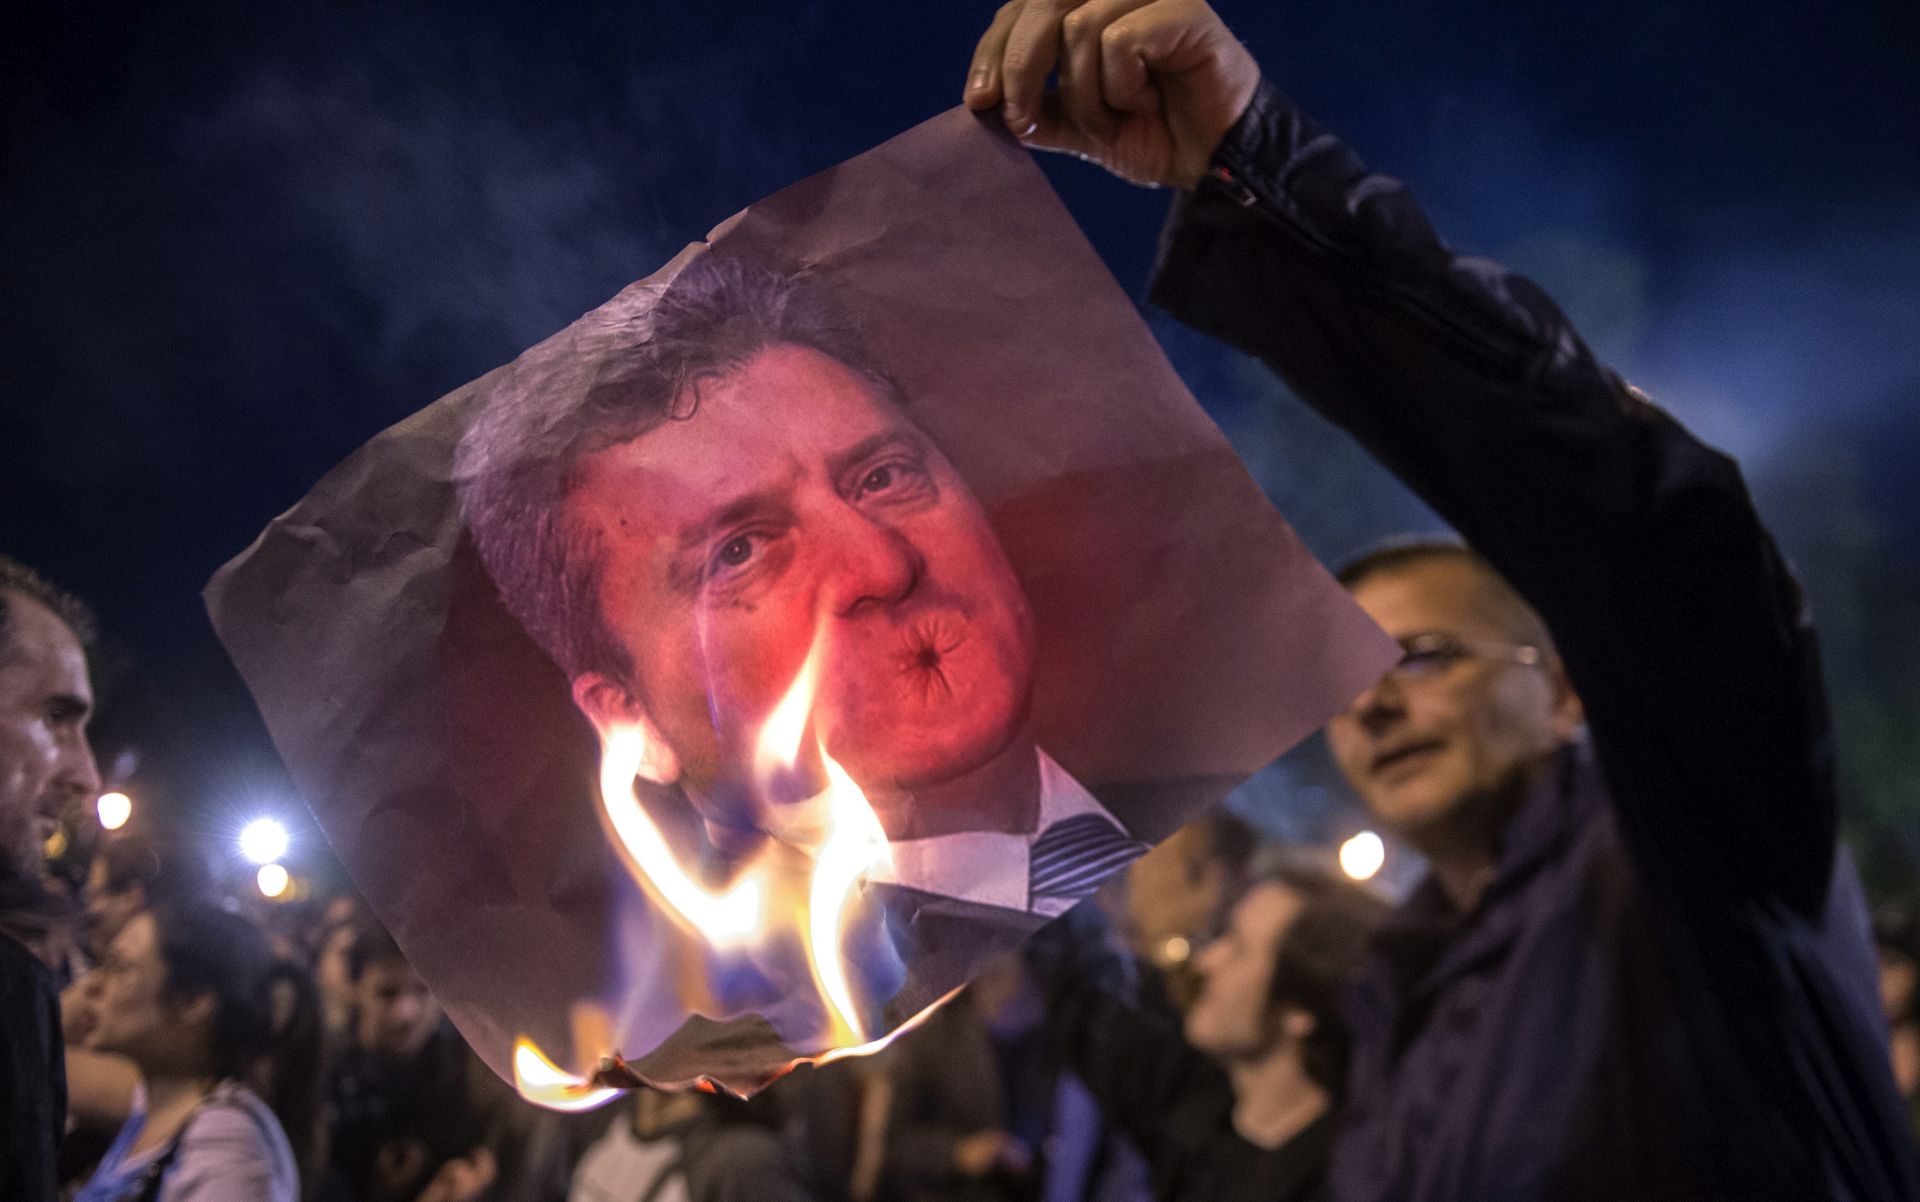 epa05257654 Protesters burn the picture of Macedonian President George Ivanov during the protest against Macedonian President Gjorge Ivanov's decision on wiretapping amnesty, in Skopje, Macedonia, 13 April 2016. Ivanov decided to abolish all judicial cases related to the big wire-tapping scandal that brought the country to early general elections scheduled for 05 June. The crisis started in 2015 when opposition SDSM started to publish illegally recorded wire-tapped phone conversations of the highest Governmental officials claiming they show financial crime and eventual evidences of electoral frauds of the ruling conservative VMRO-DPMNE party of then PM Gruevski. Gruevski denied everything saying 'foreign intelligence services' are trying to topple his Government he was administrating from 2006.  EPA/NAKE BATEV